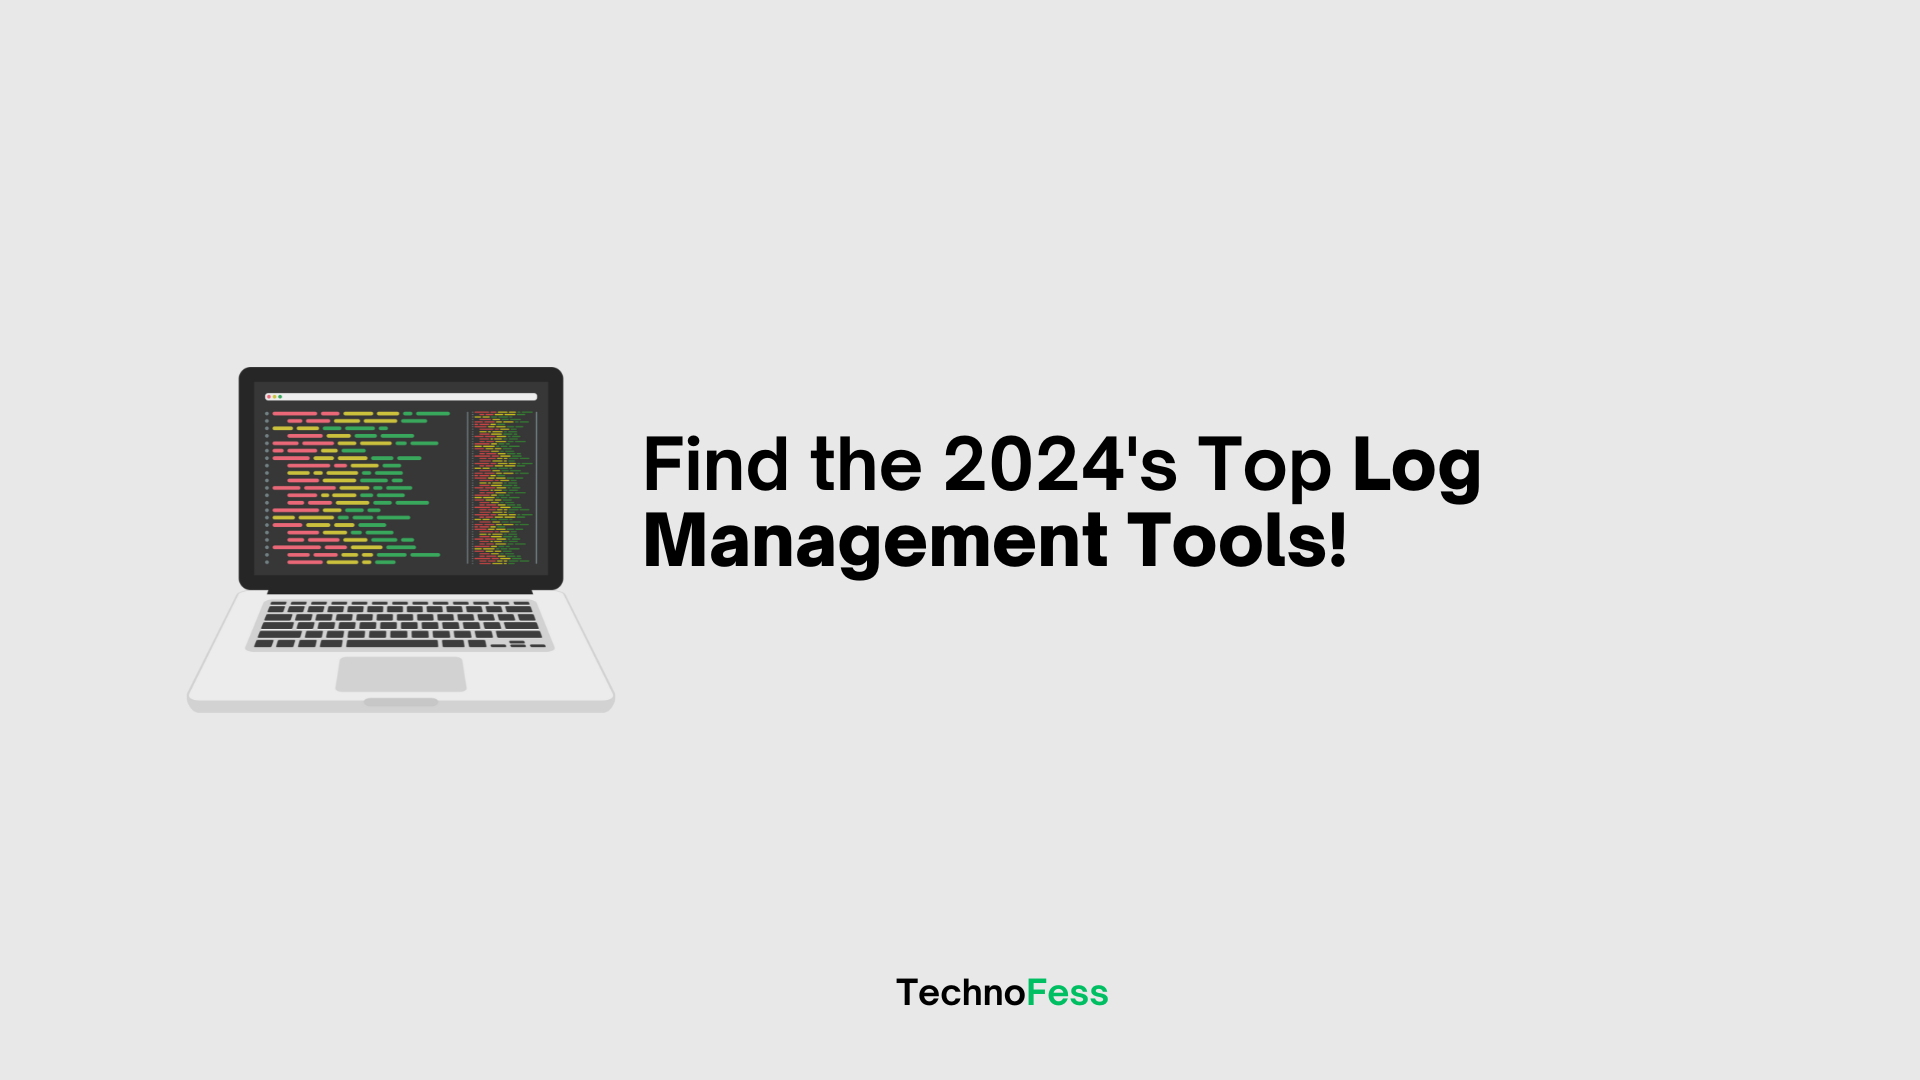 Find the 2024's Top Log Management Tools!